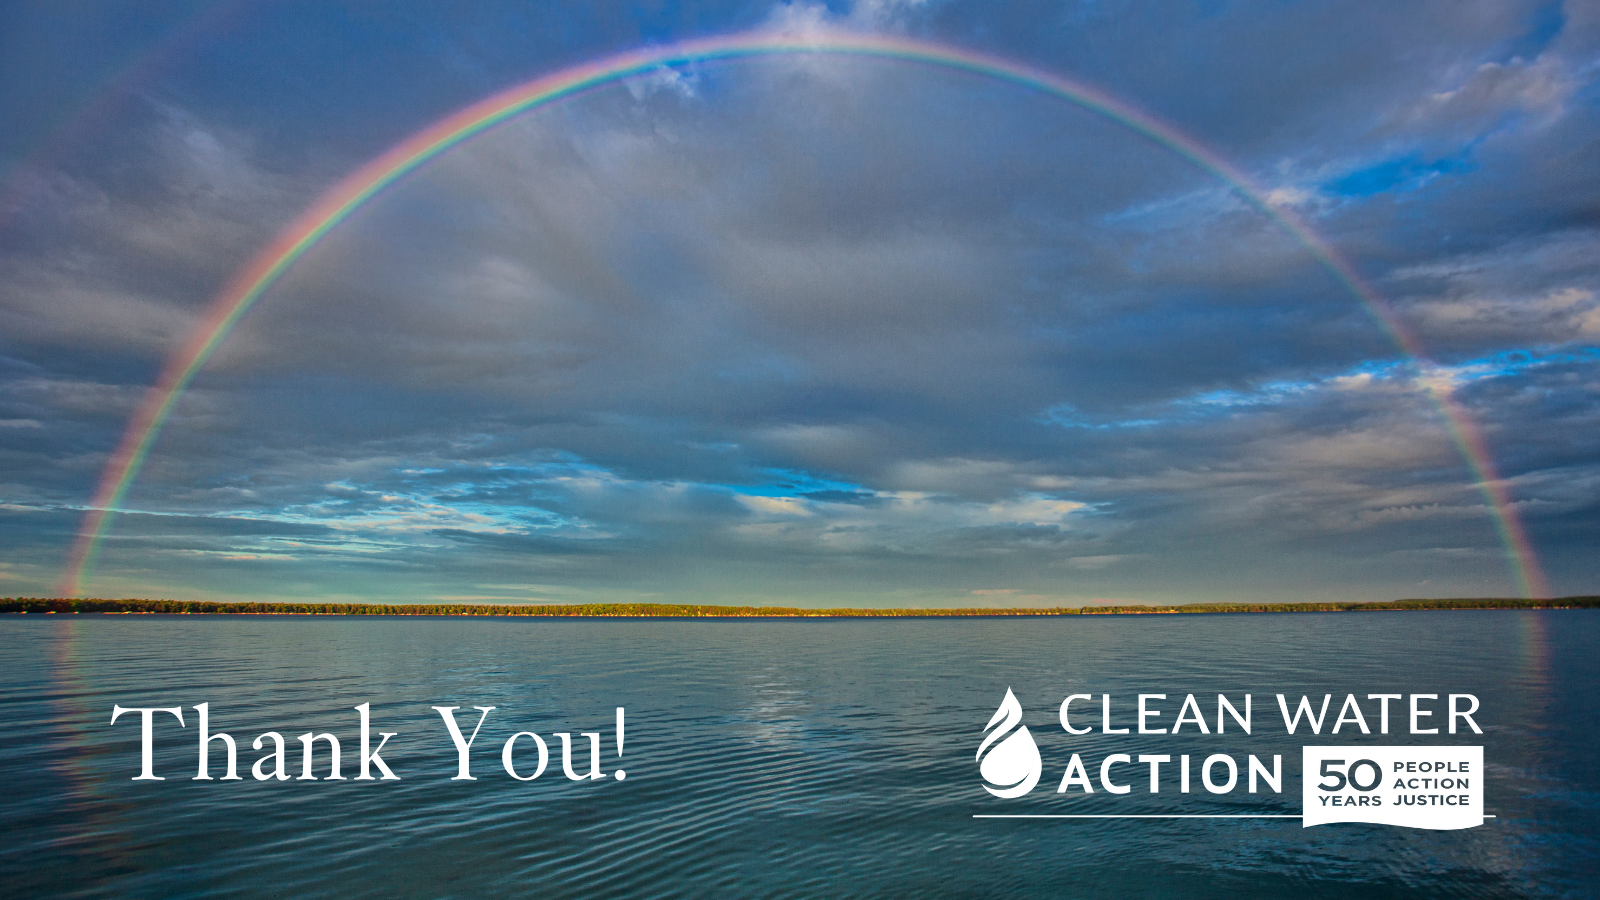 Full rainbow over a lake. Thank you! - Clean Water Action